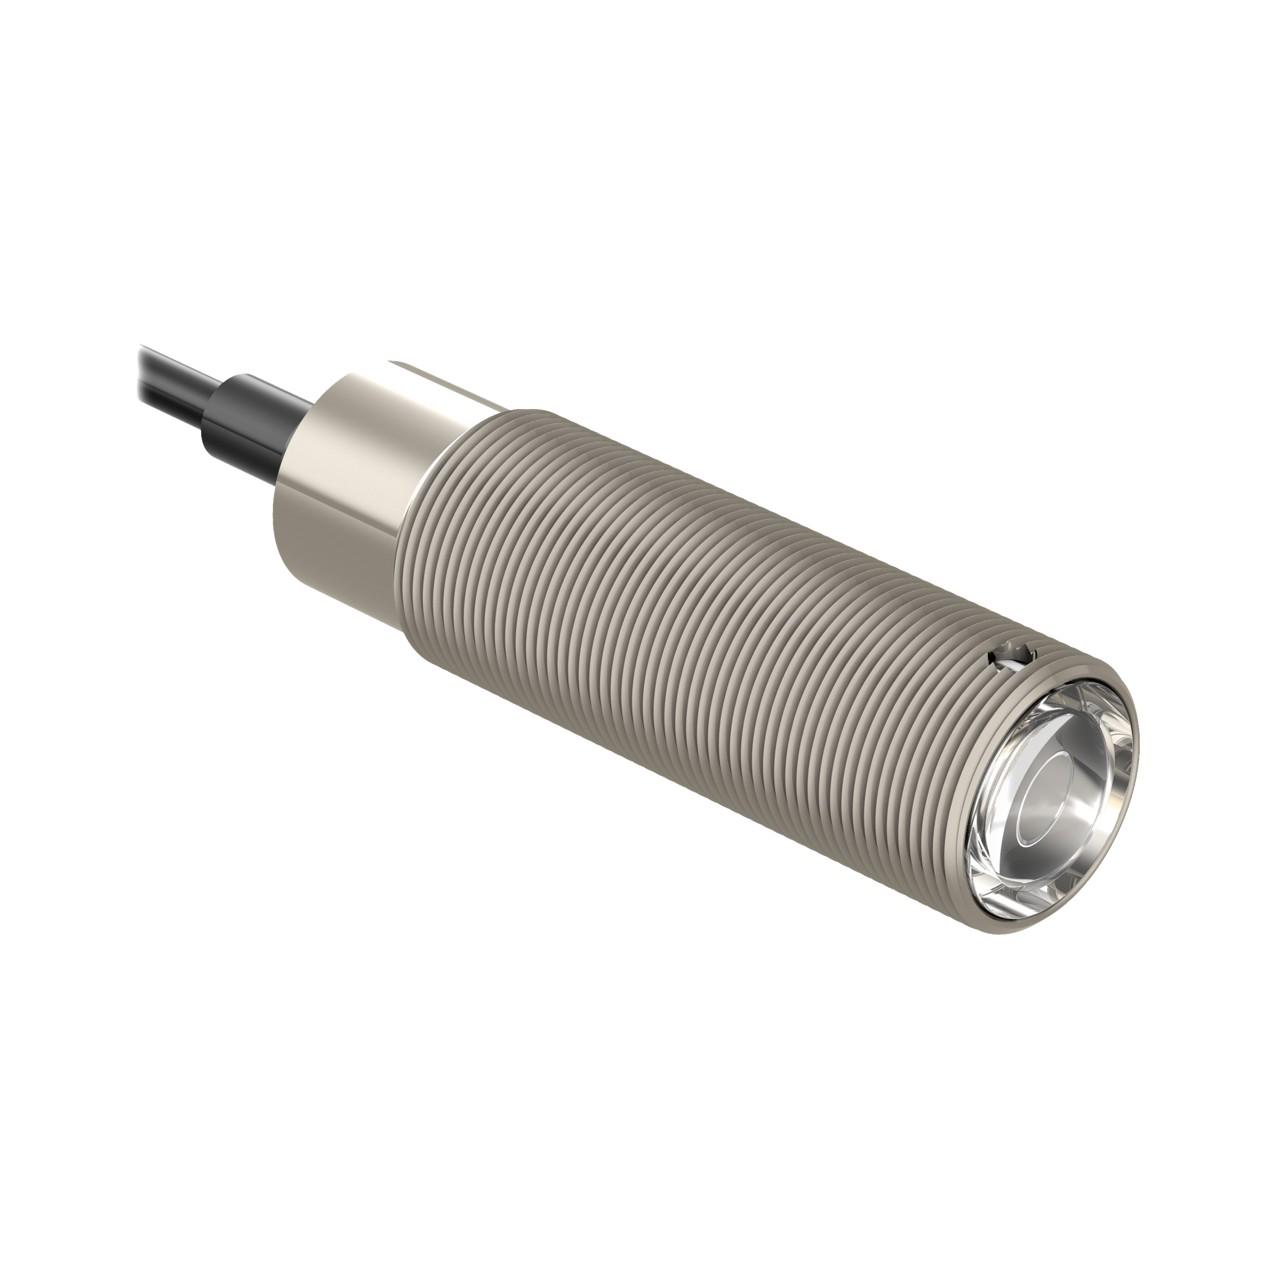 Banner SMA30SEL Photo-electric emitter with through-beam system / opposed mode - "A" modulation frequency - washdown rated - Banner Engineering (EZ-BEAM series - SM30 series) - Part #27285 - Infrared (IR) light (880nm) - Supply voltage 10Vdc-30Vdc (12Vdc / 24Vdc nom.) / 